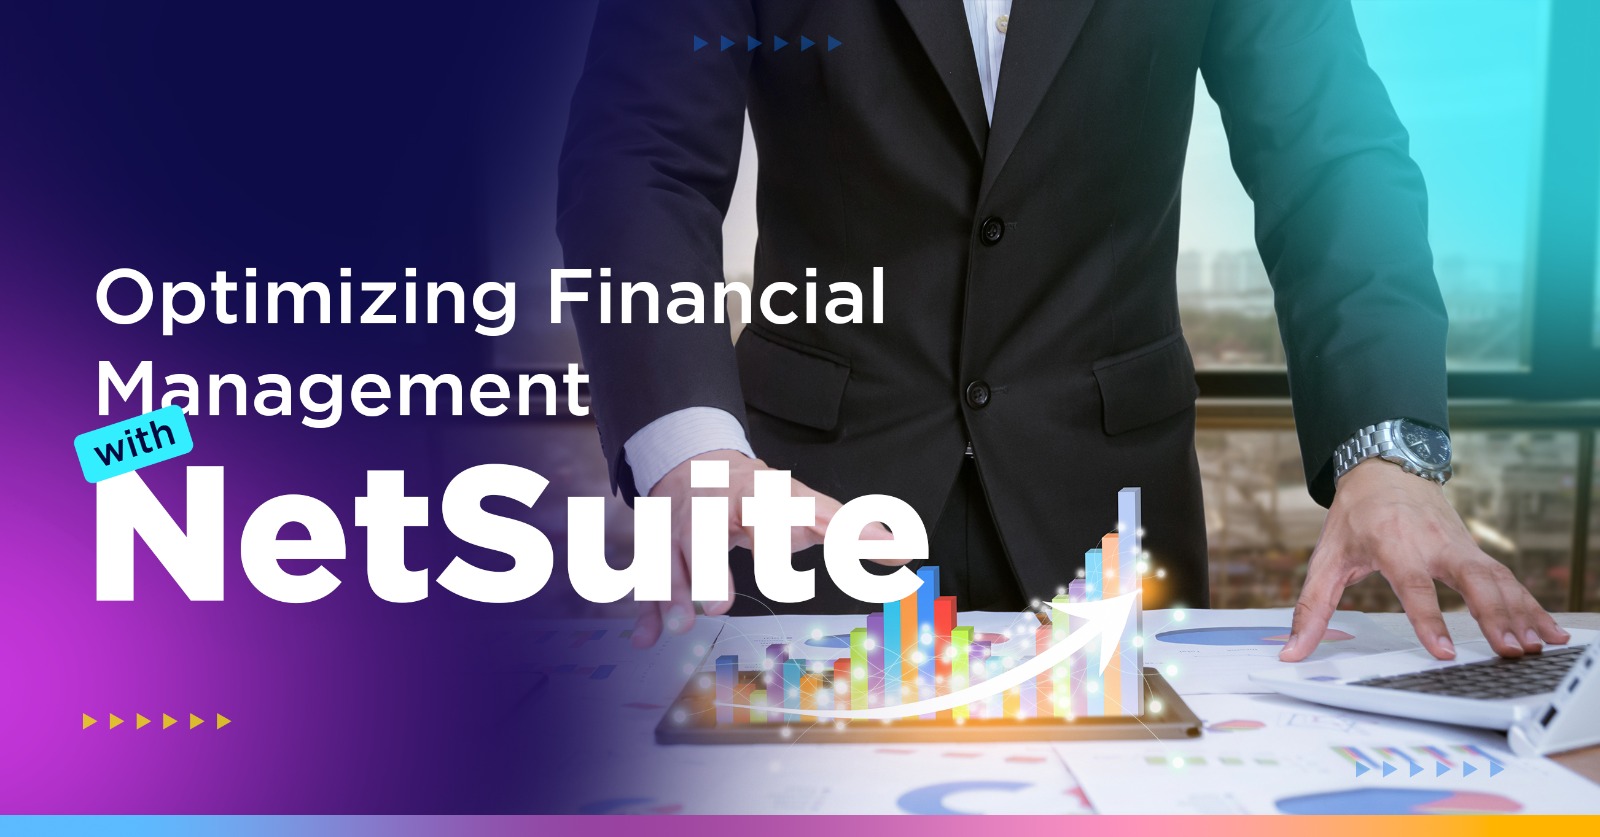 Optimizing Financial Management with NetSuite